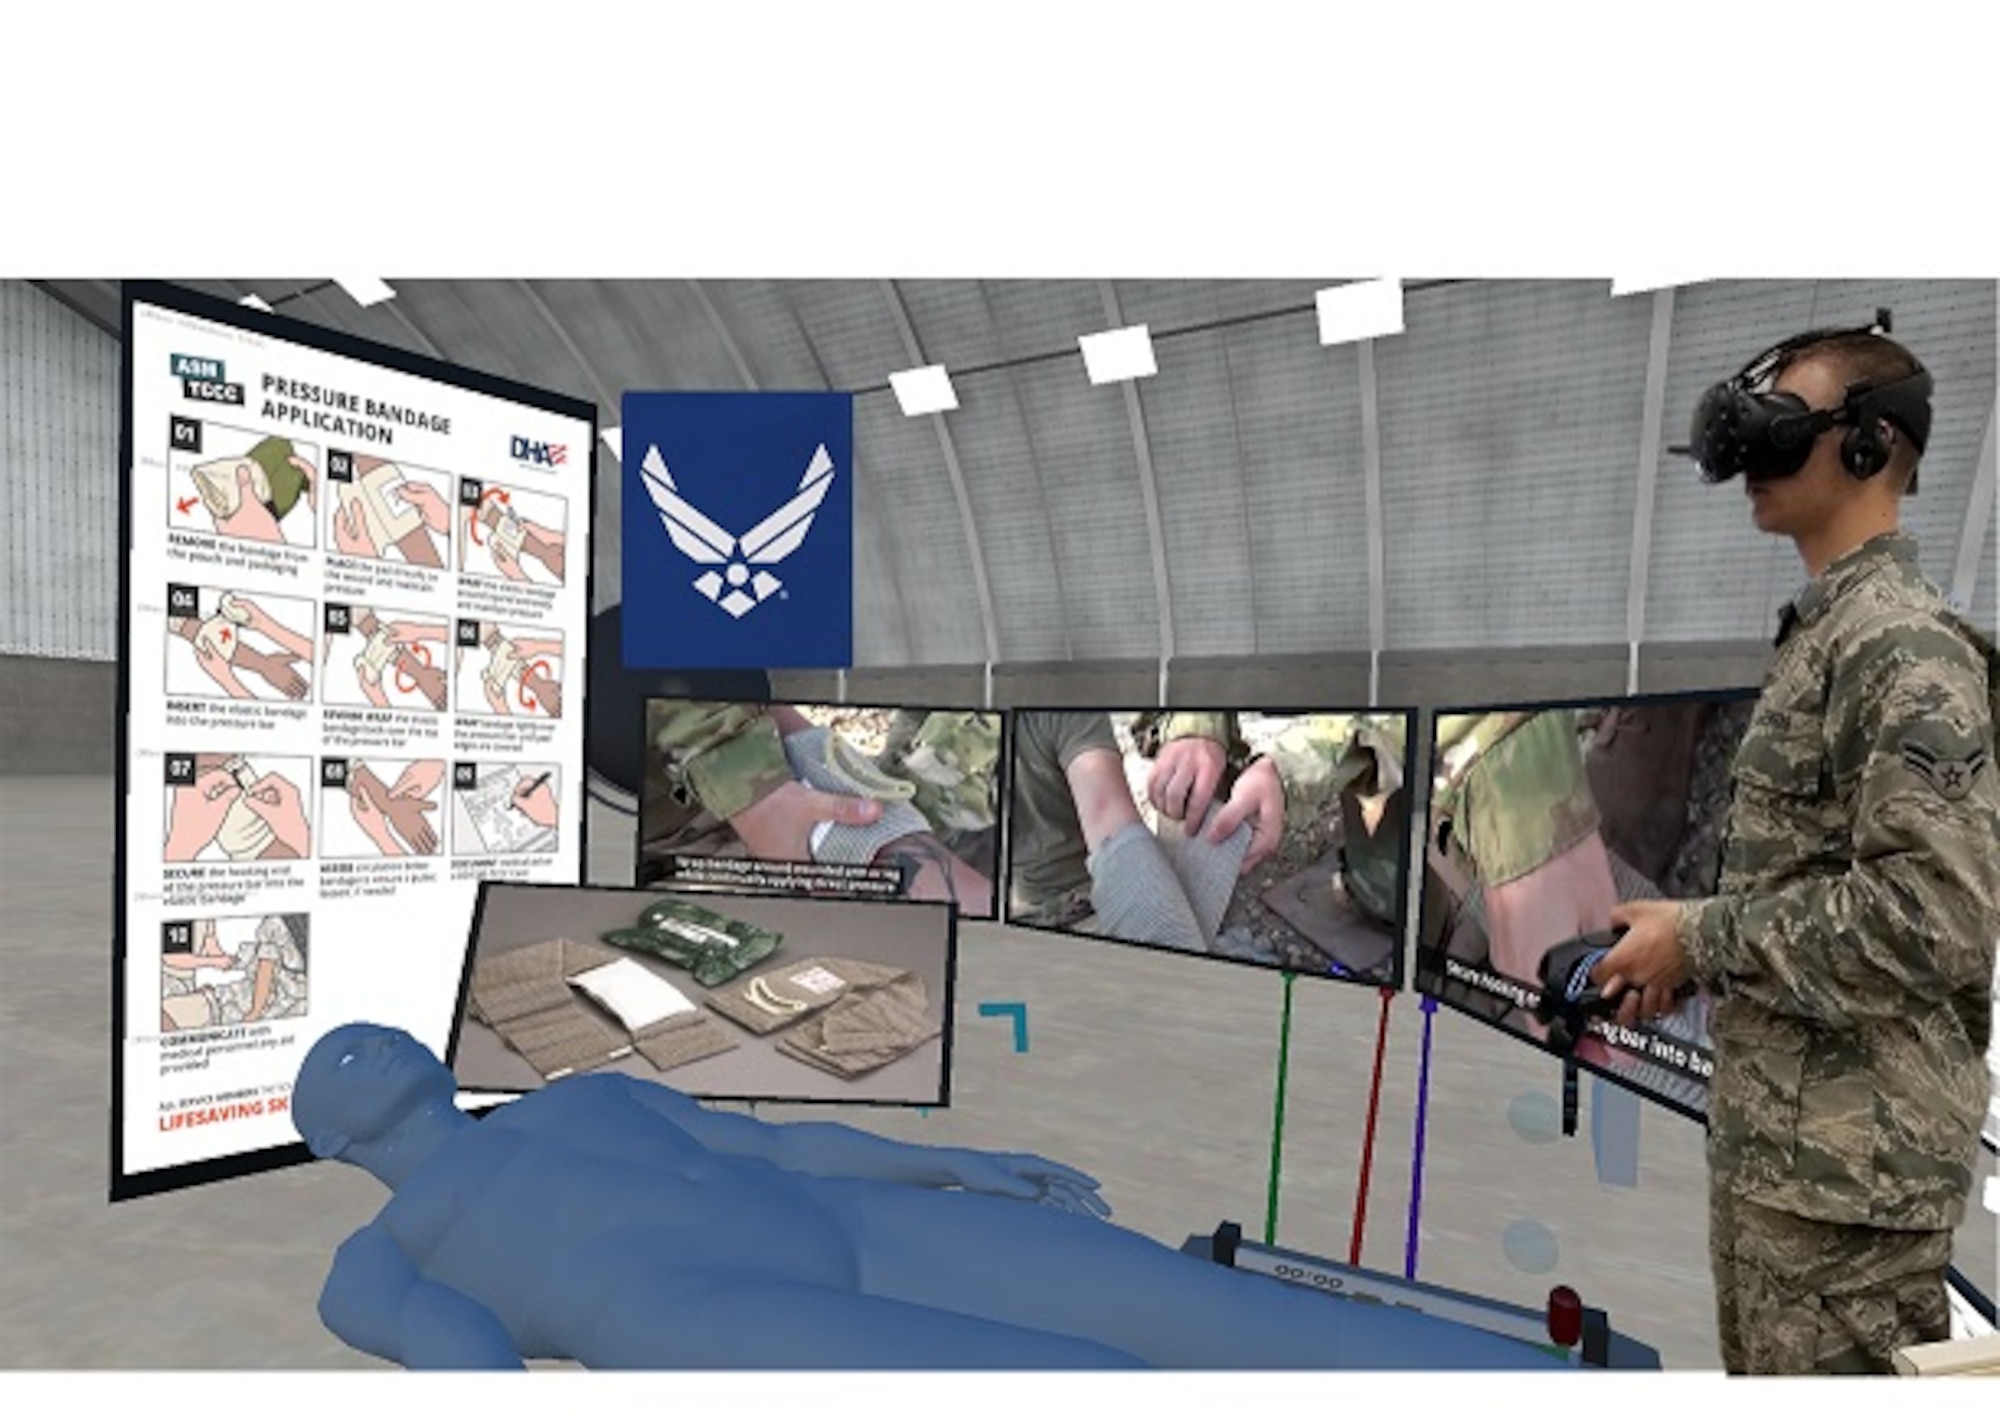 An Airman uses the Enduvo system to view medical lesson in virtual reality. The graphic shows what the Airman would be seeing in virtual reality. (Courtesy Graphic from Enduvo)